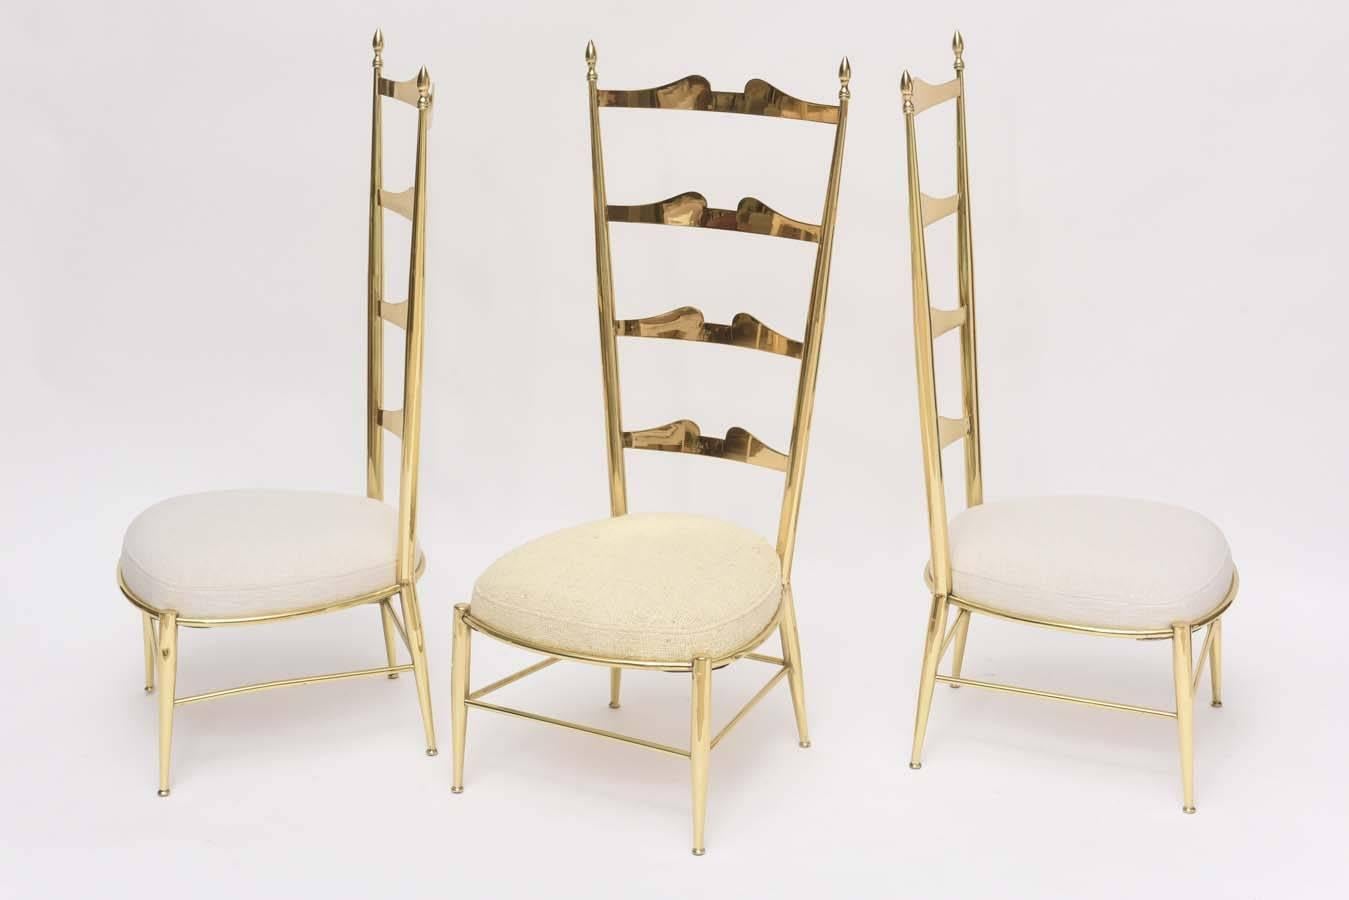 Rare Tall Back Brass Chiavari Chairs with Truncated Legs For Sale 1